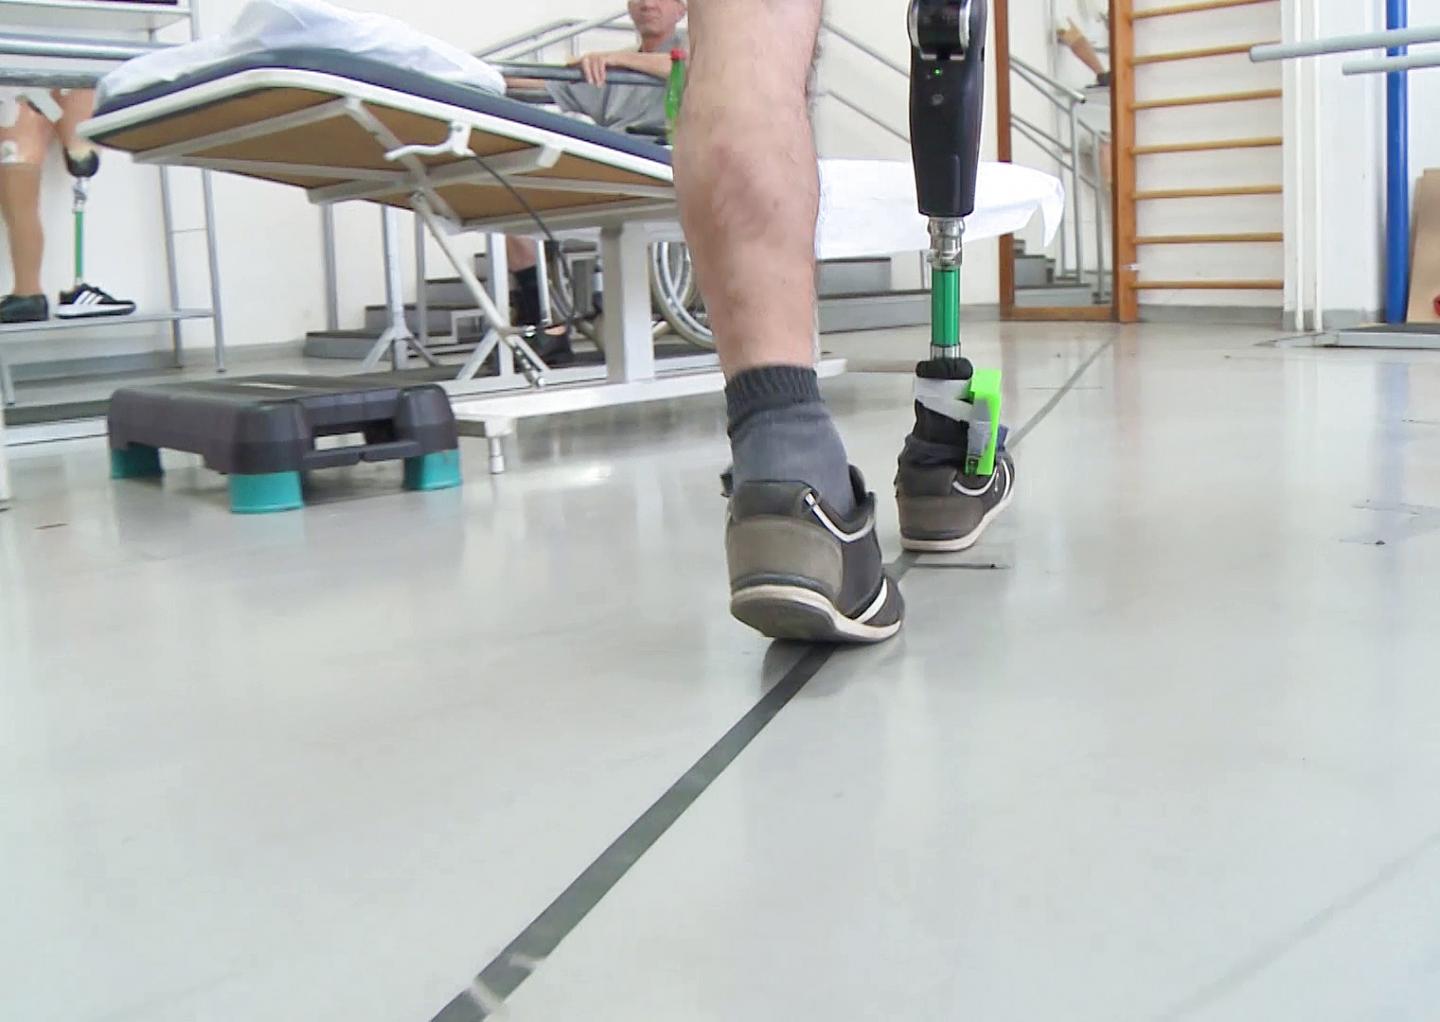 Nerve-Stimulating Leg Prosthesis Improves Movement and Functionality in Amputees (3 of 10)